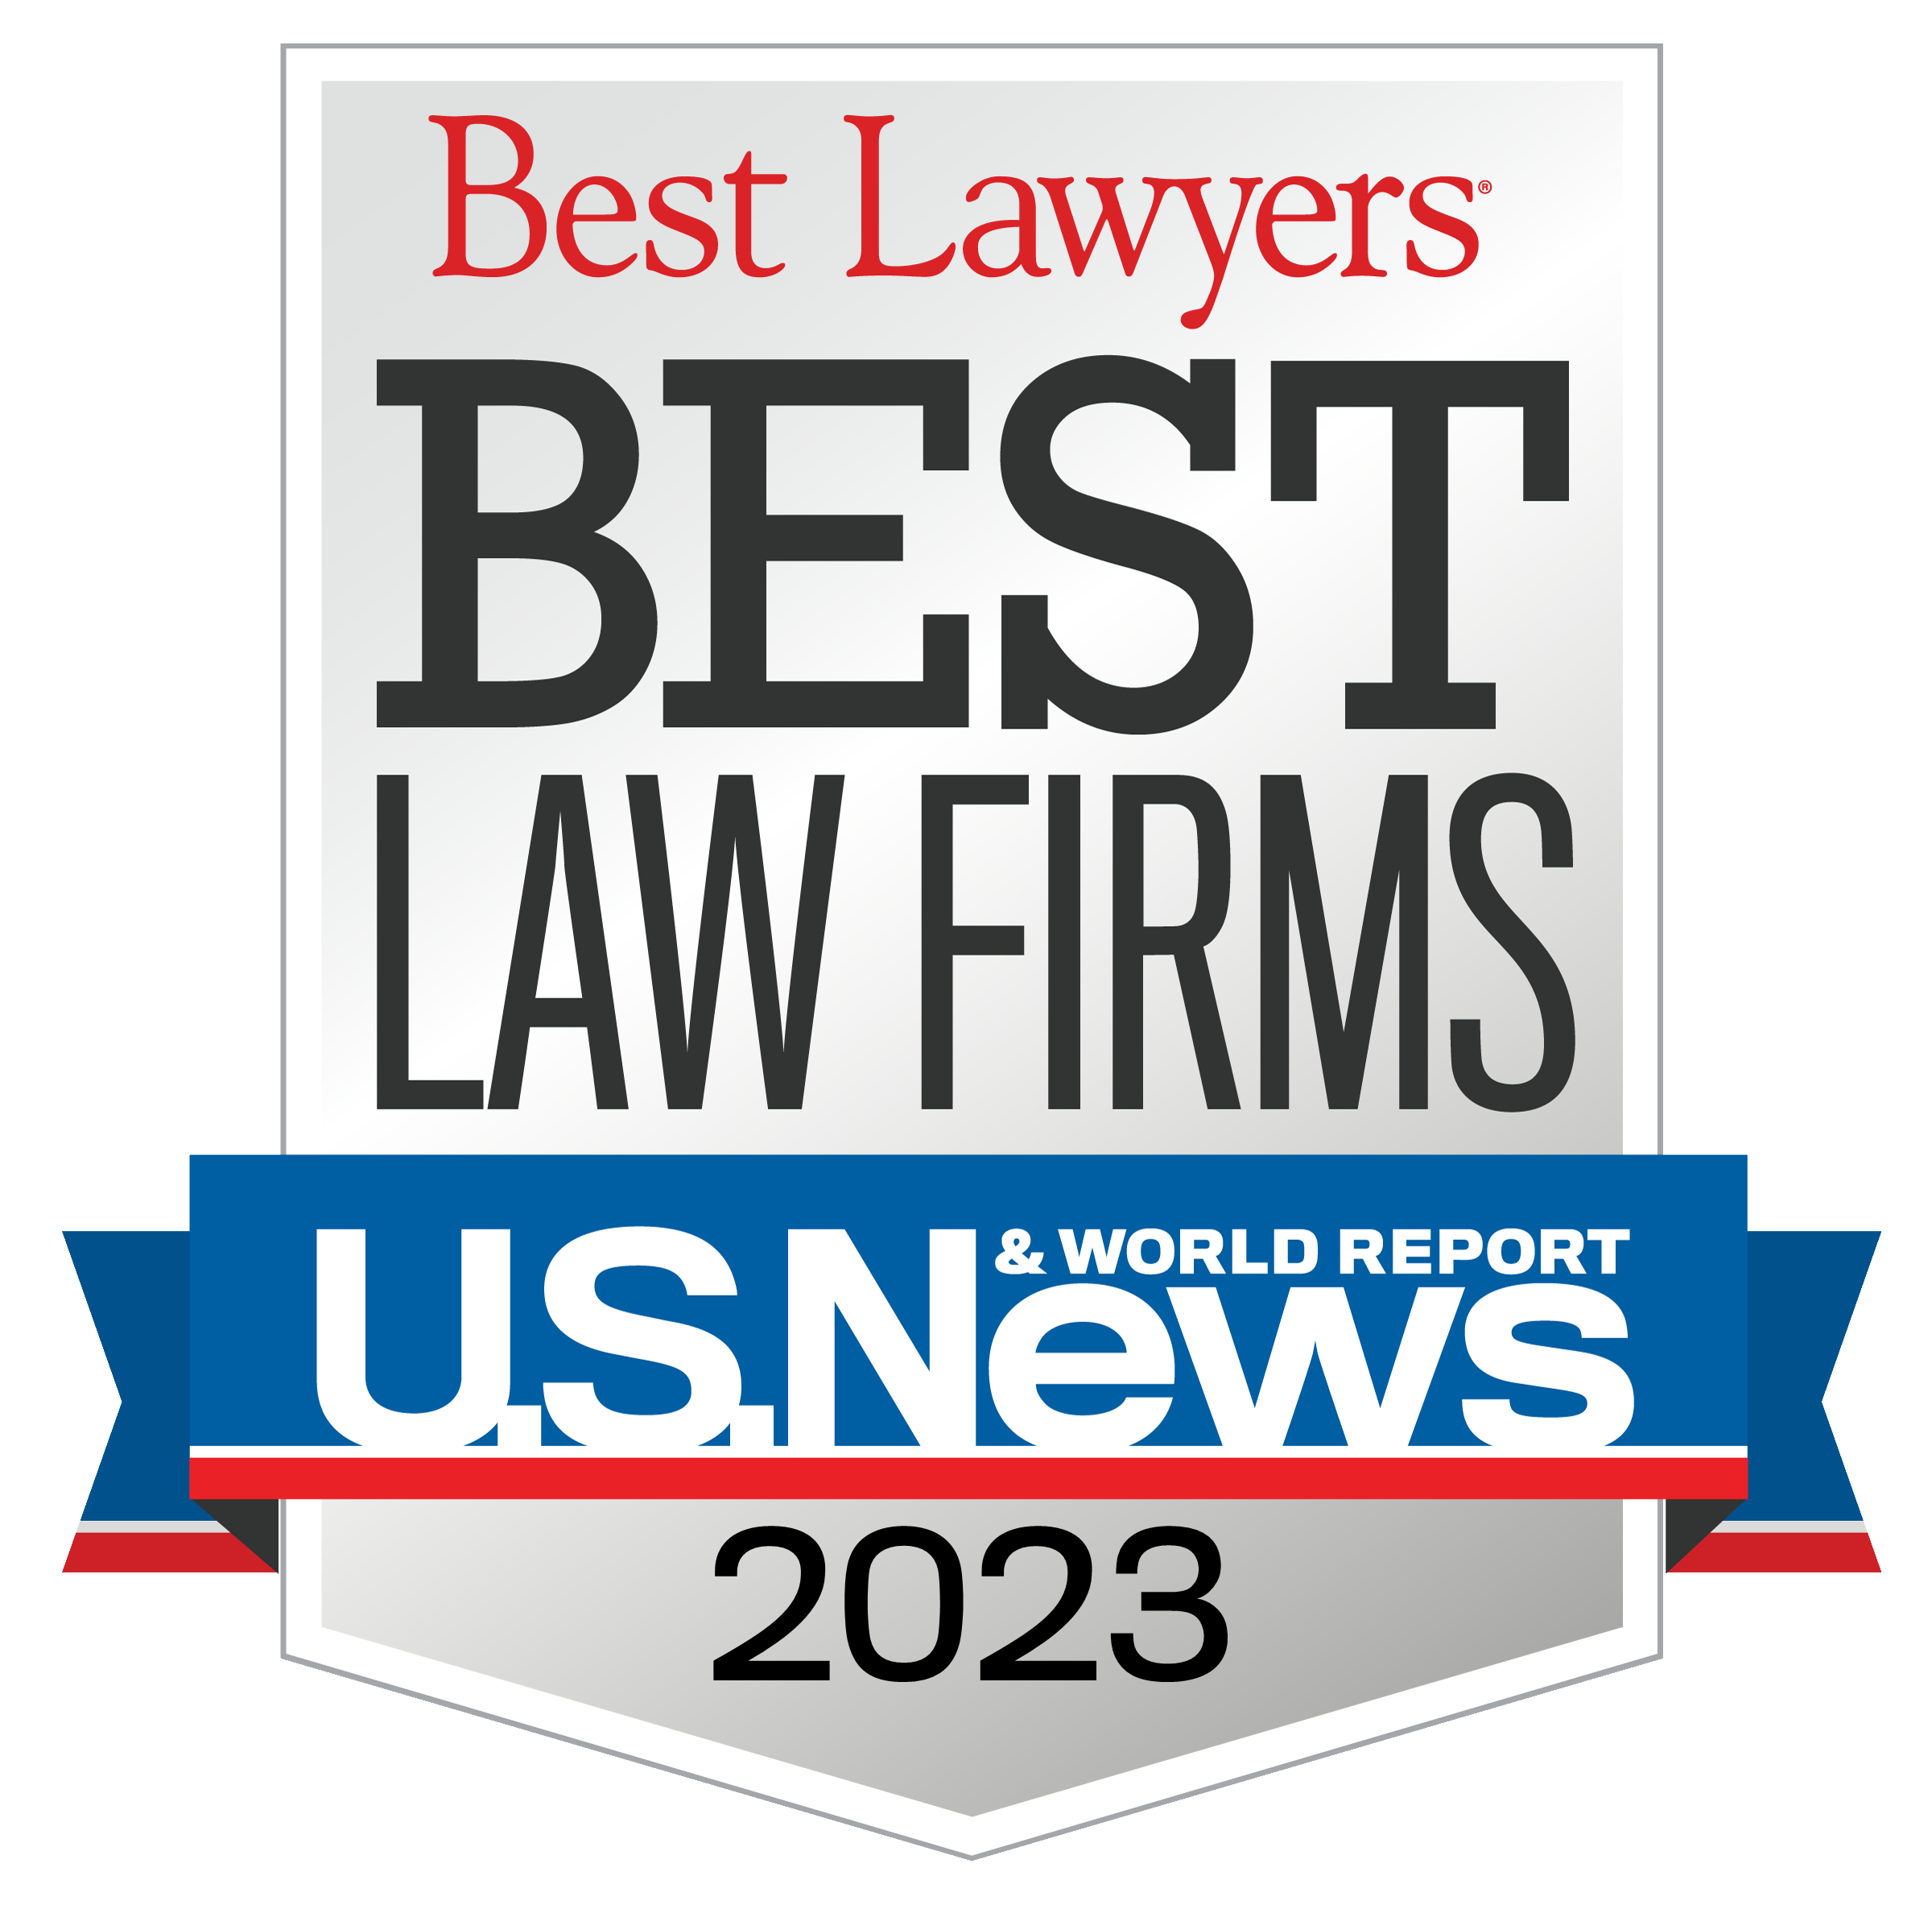 Best Lawyers Best Law Firms 2023 badge